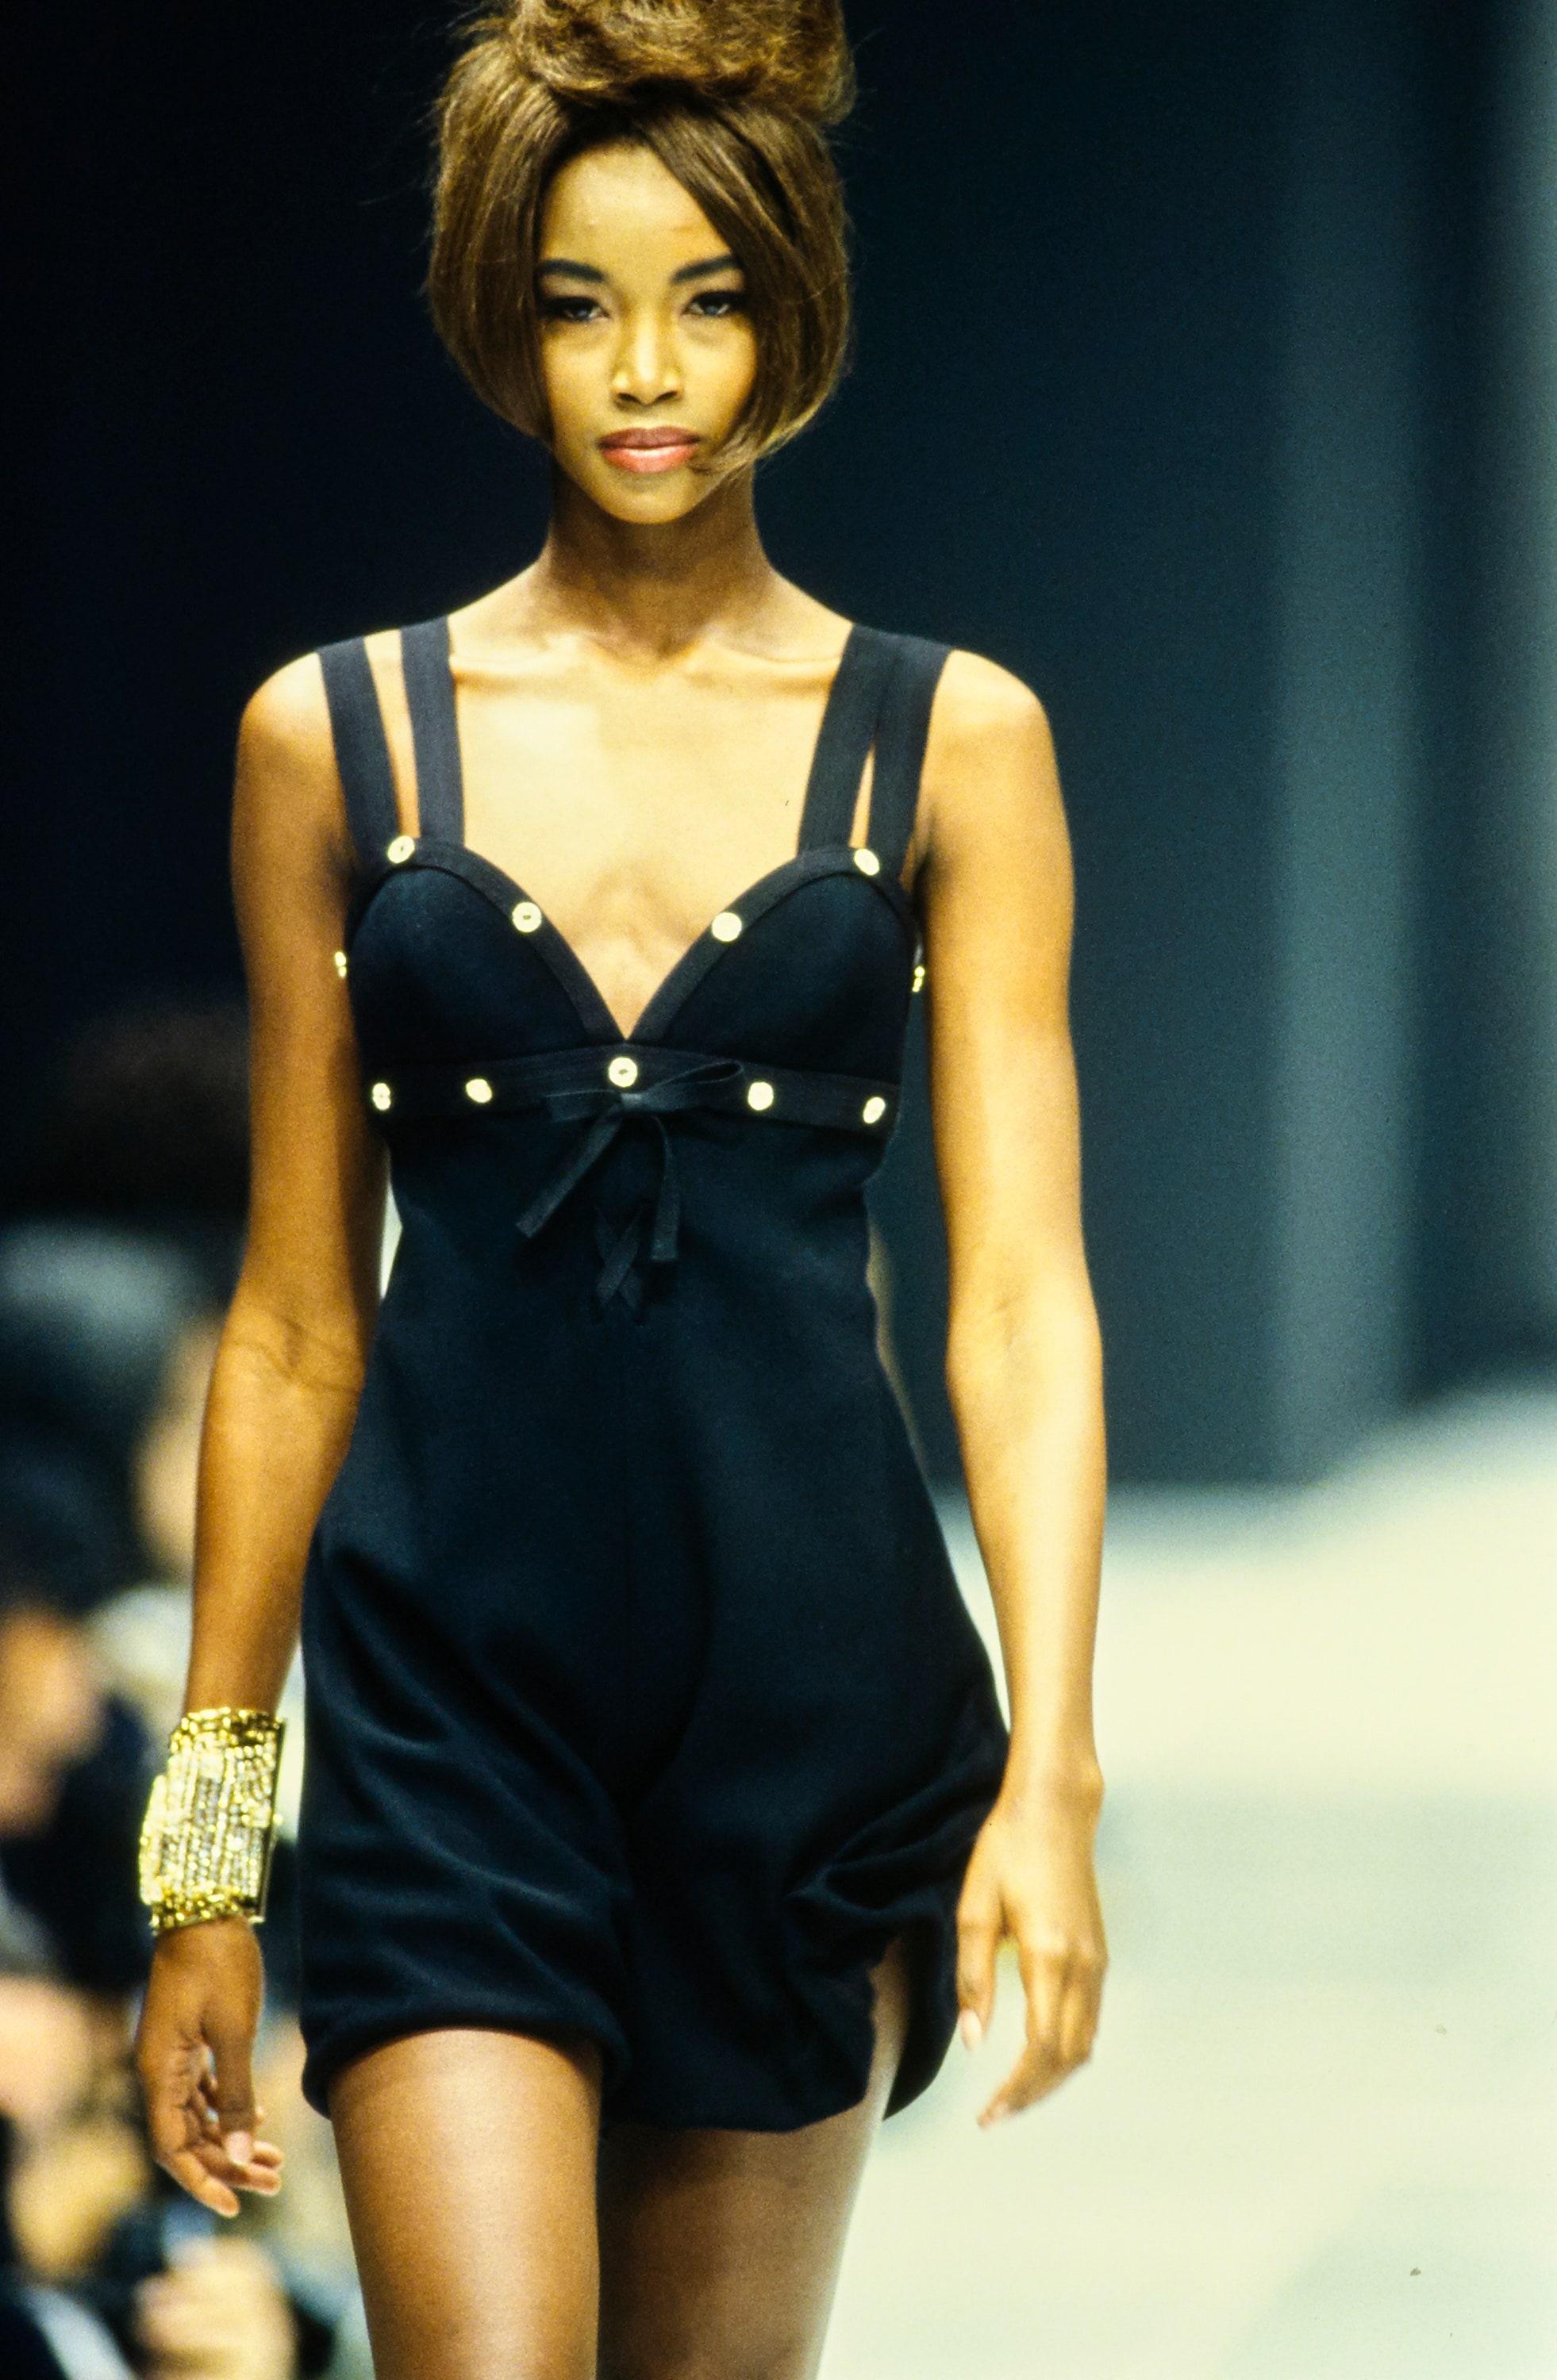 ▪ Gianni Versace black evening playsuit 
▪ Double strap 
▪ Sweetheart neckline 
▪ Bow and criss-cross detail at center-front 
▪ Gold studs with crystals 
▪ 62% Virgin Wool, 38% Silk
▪ IT 38 - FR 34 - UK 6
▪ Spring-Summer 1992